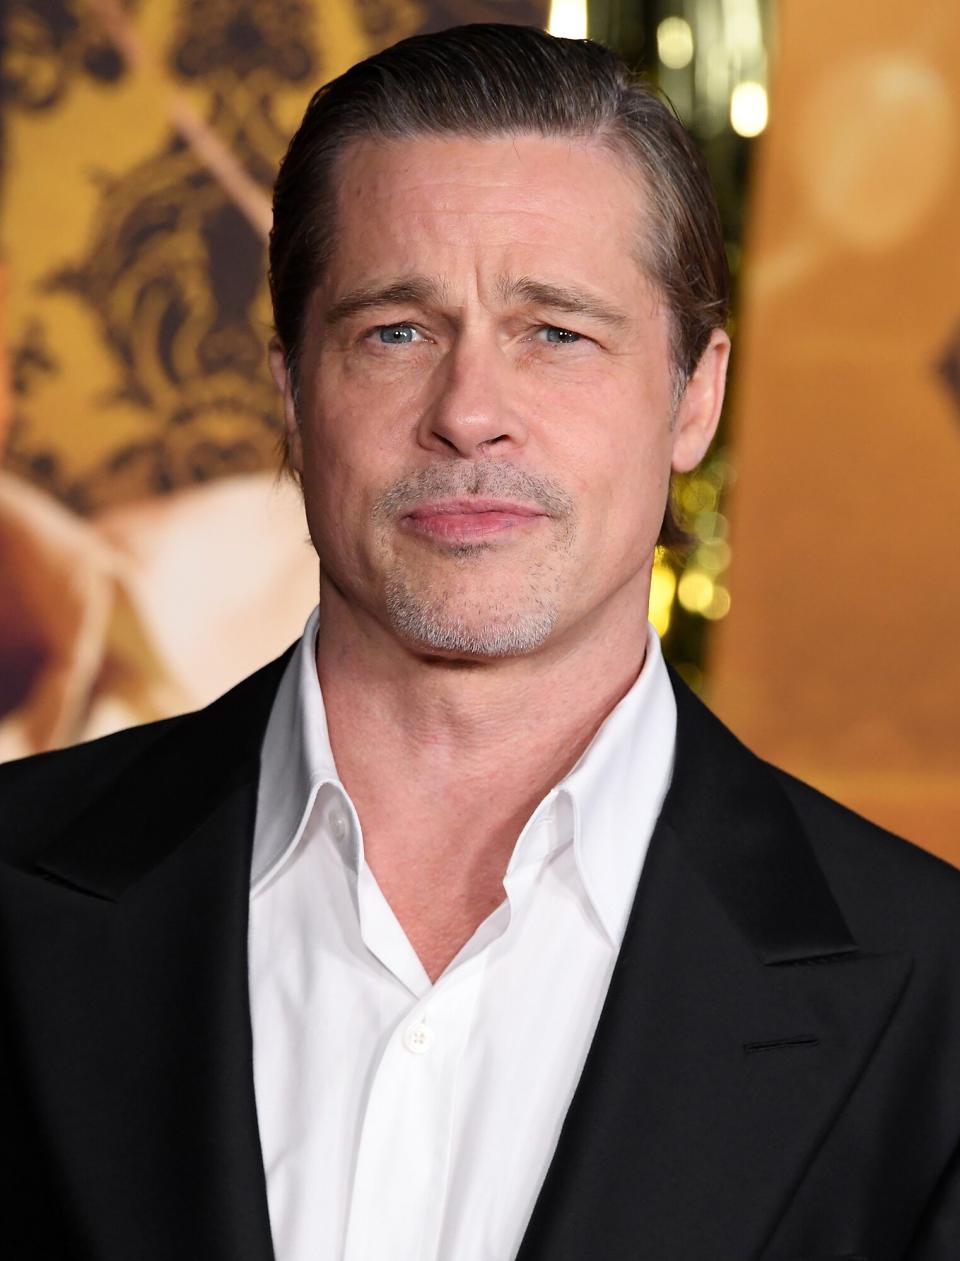 Brad Pitt arrives at the "Babylon" Global Premiere Screening at Academy Museum of Motion Pictures on December 15, 2022 in Los Angeles, California